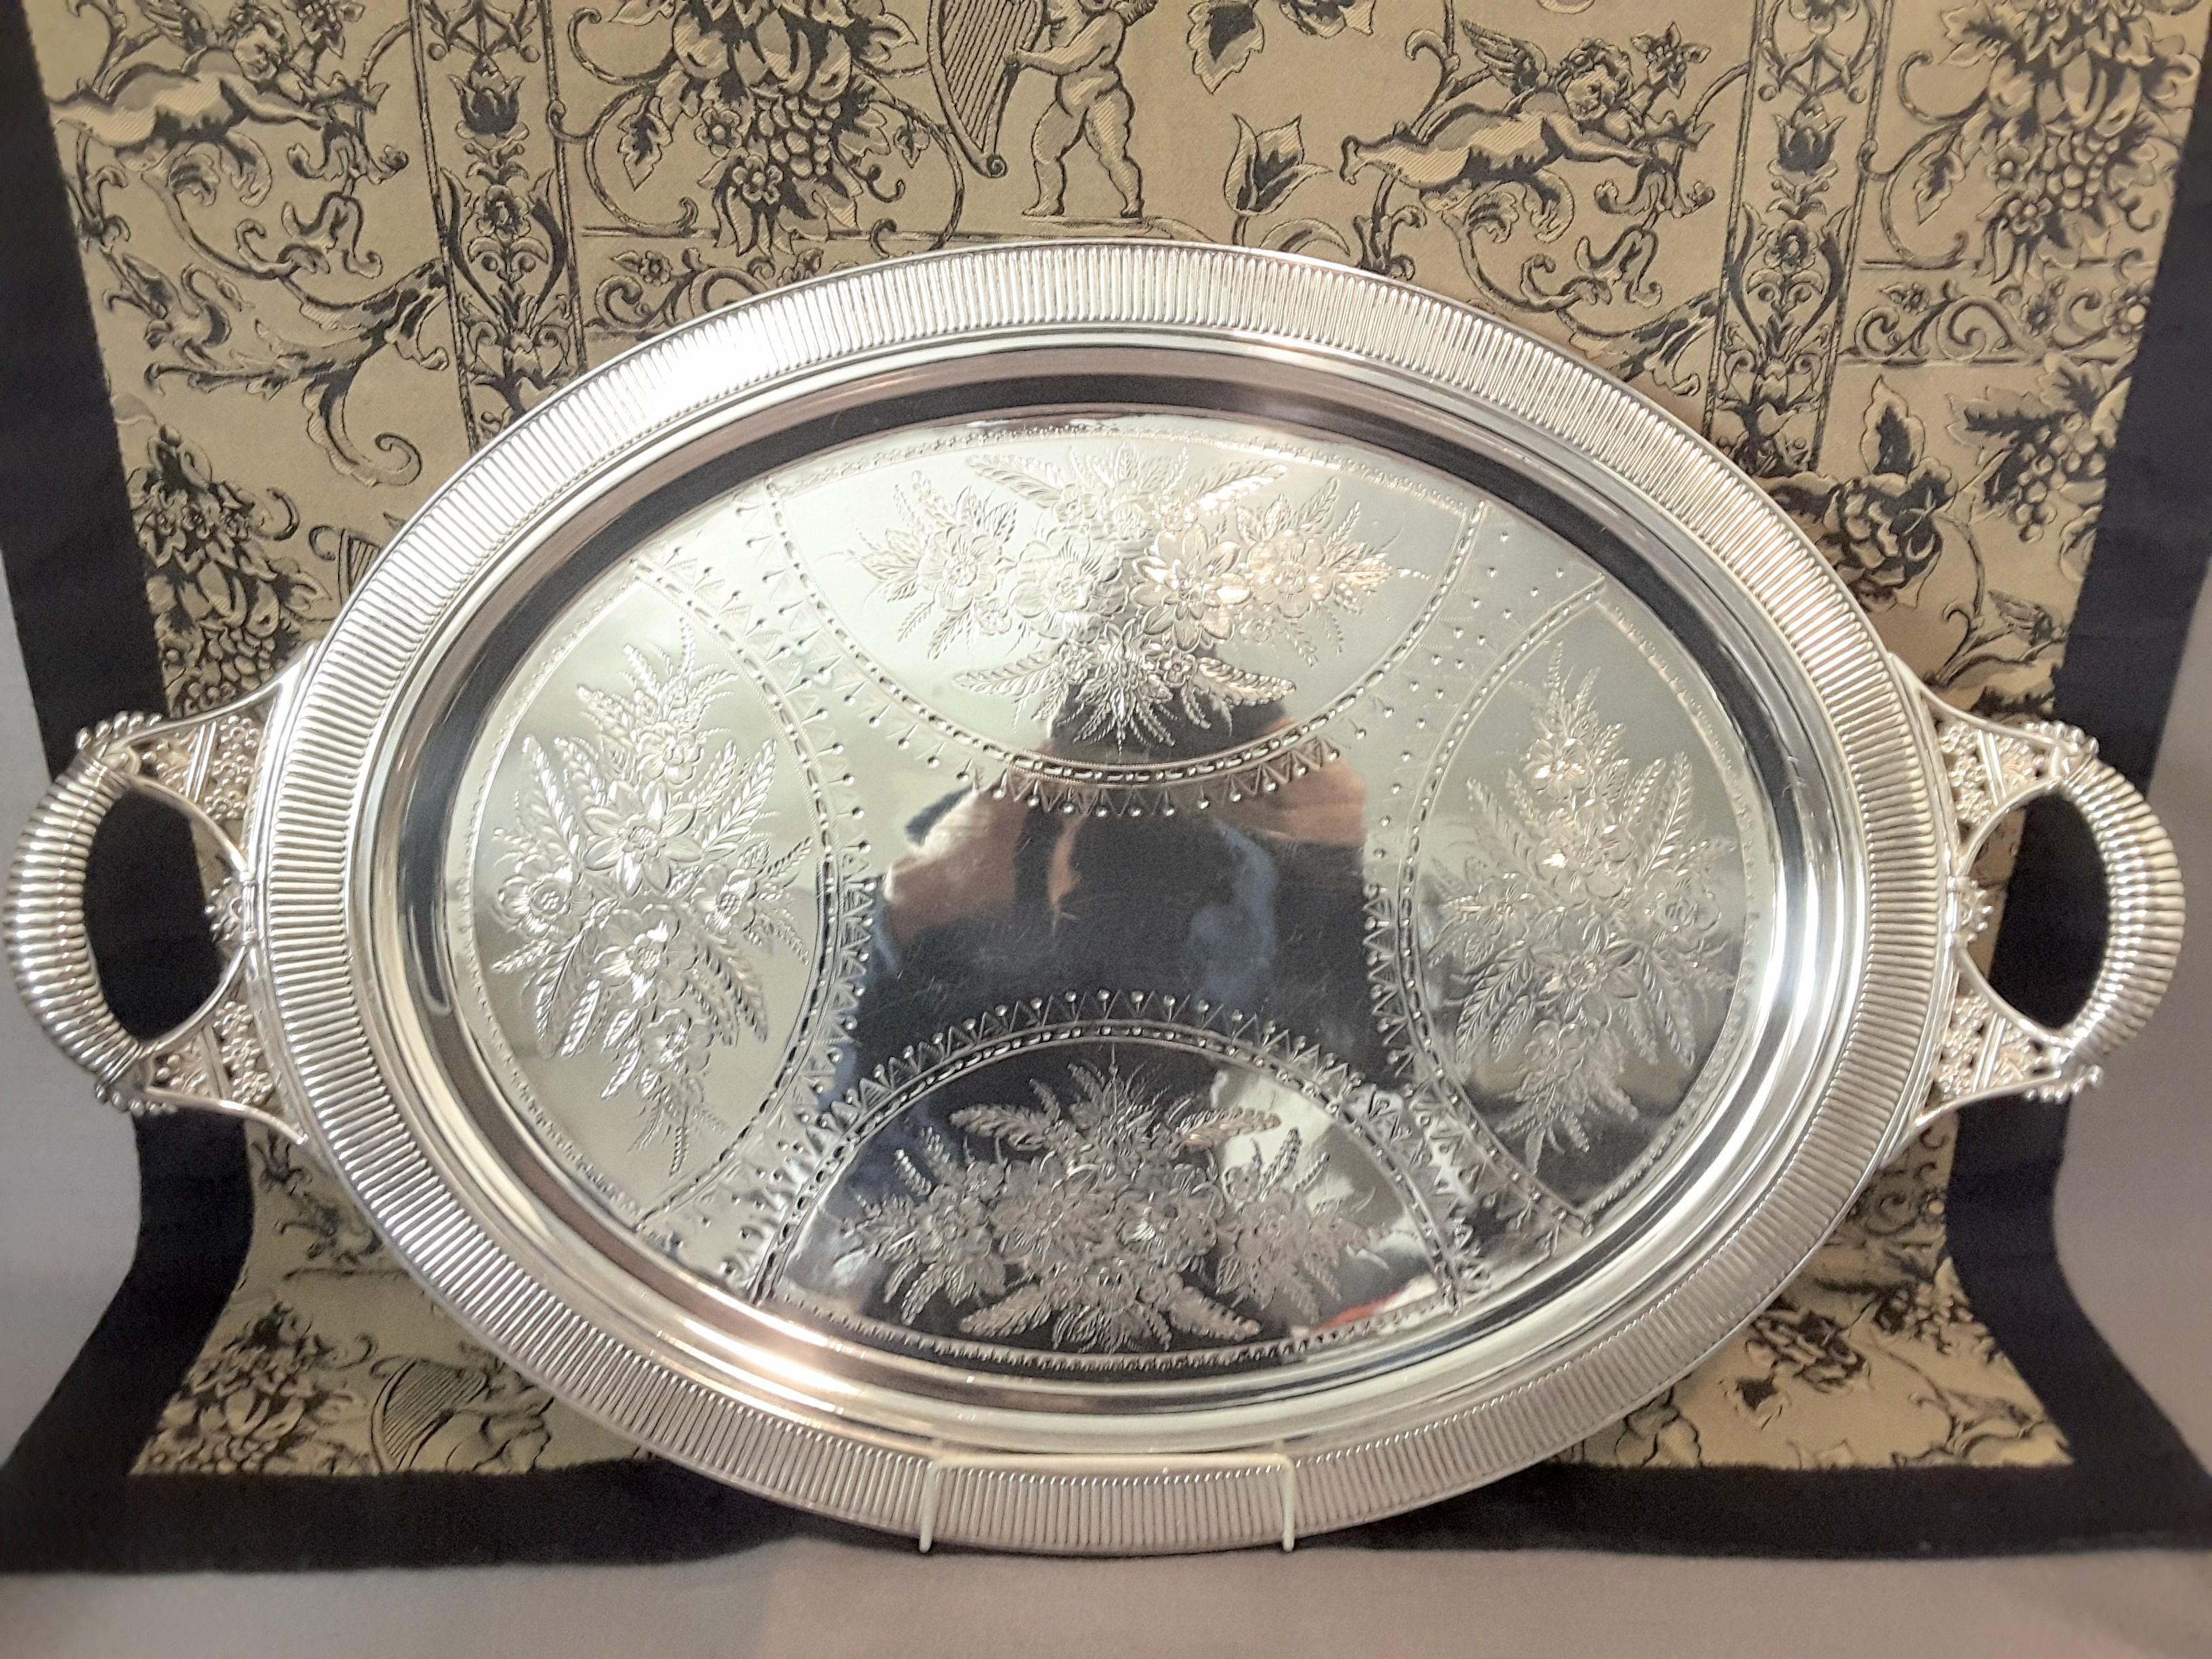 American Exquisite Aesthetic Movement Silverplated Tea Service by Simpson, Hall & Miller For Sale